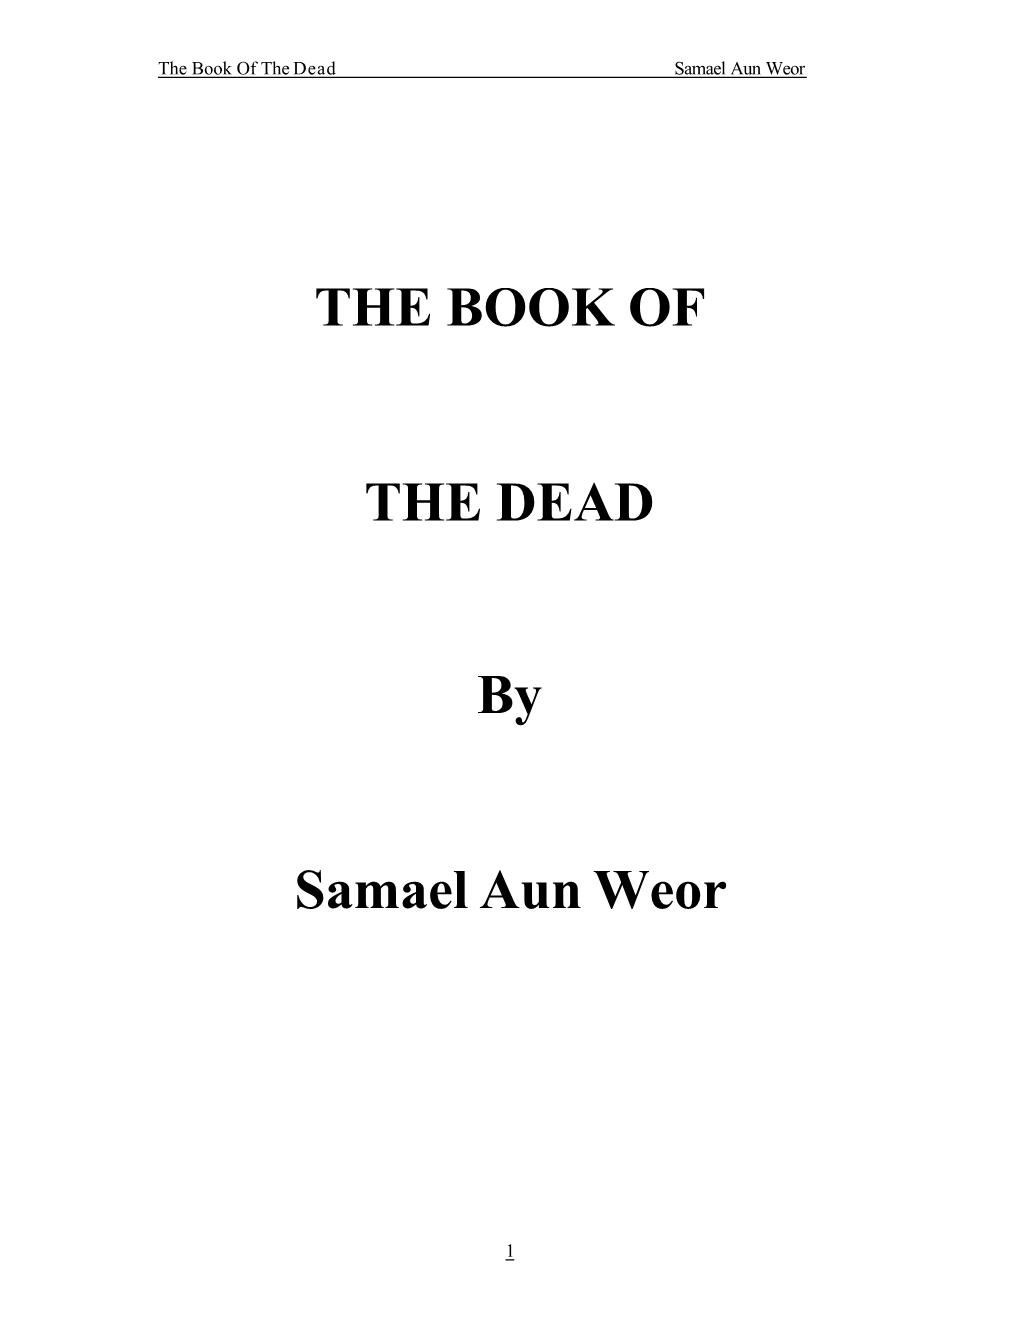 THE BOOK of the DEAD by Samael Aun Weor